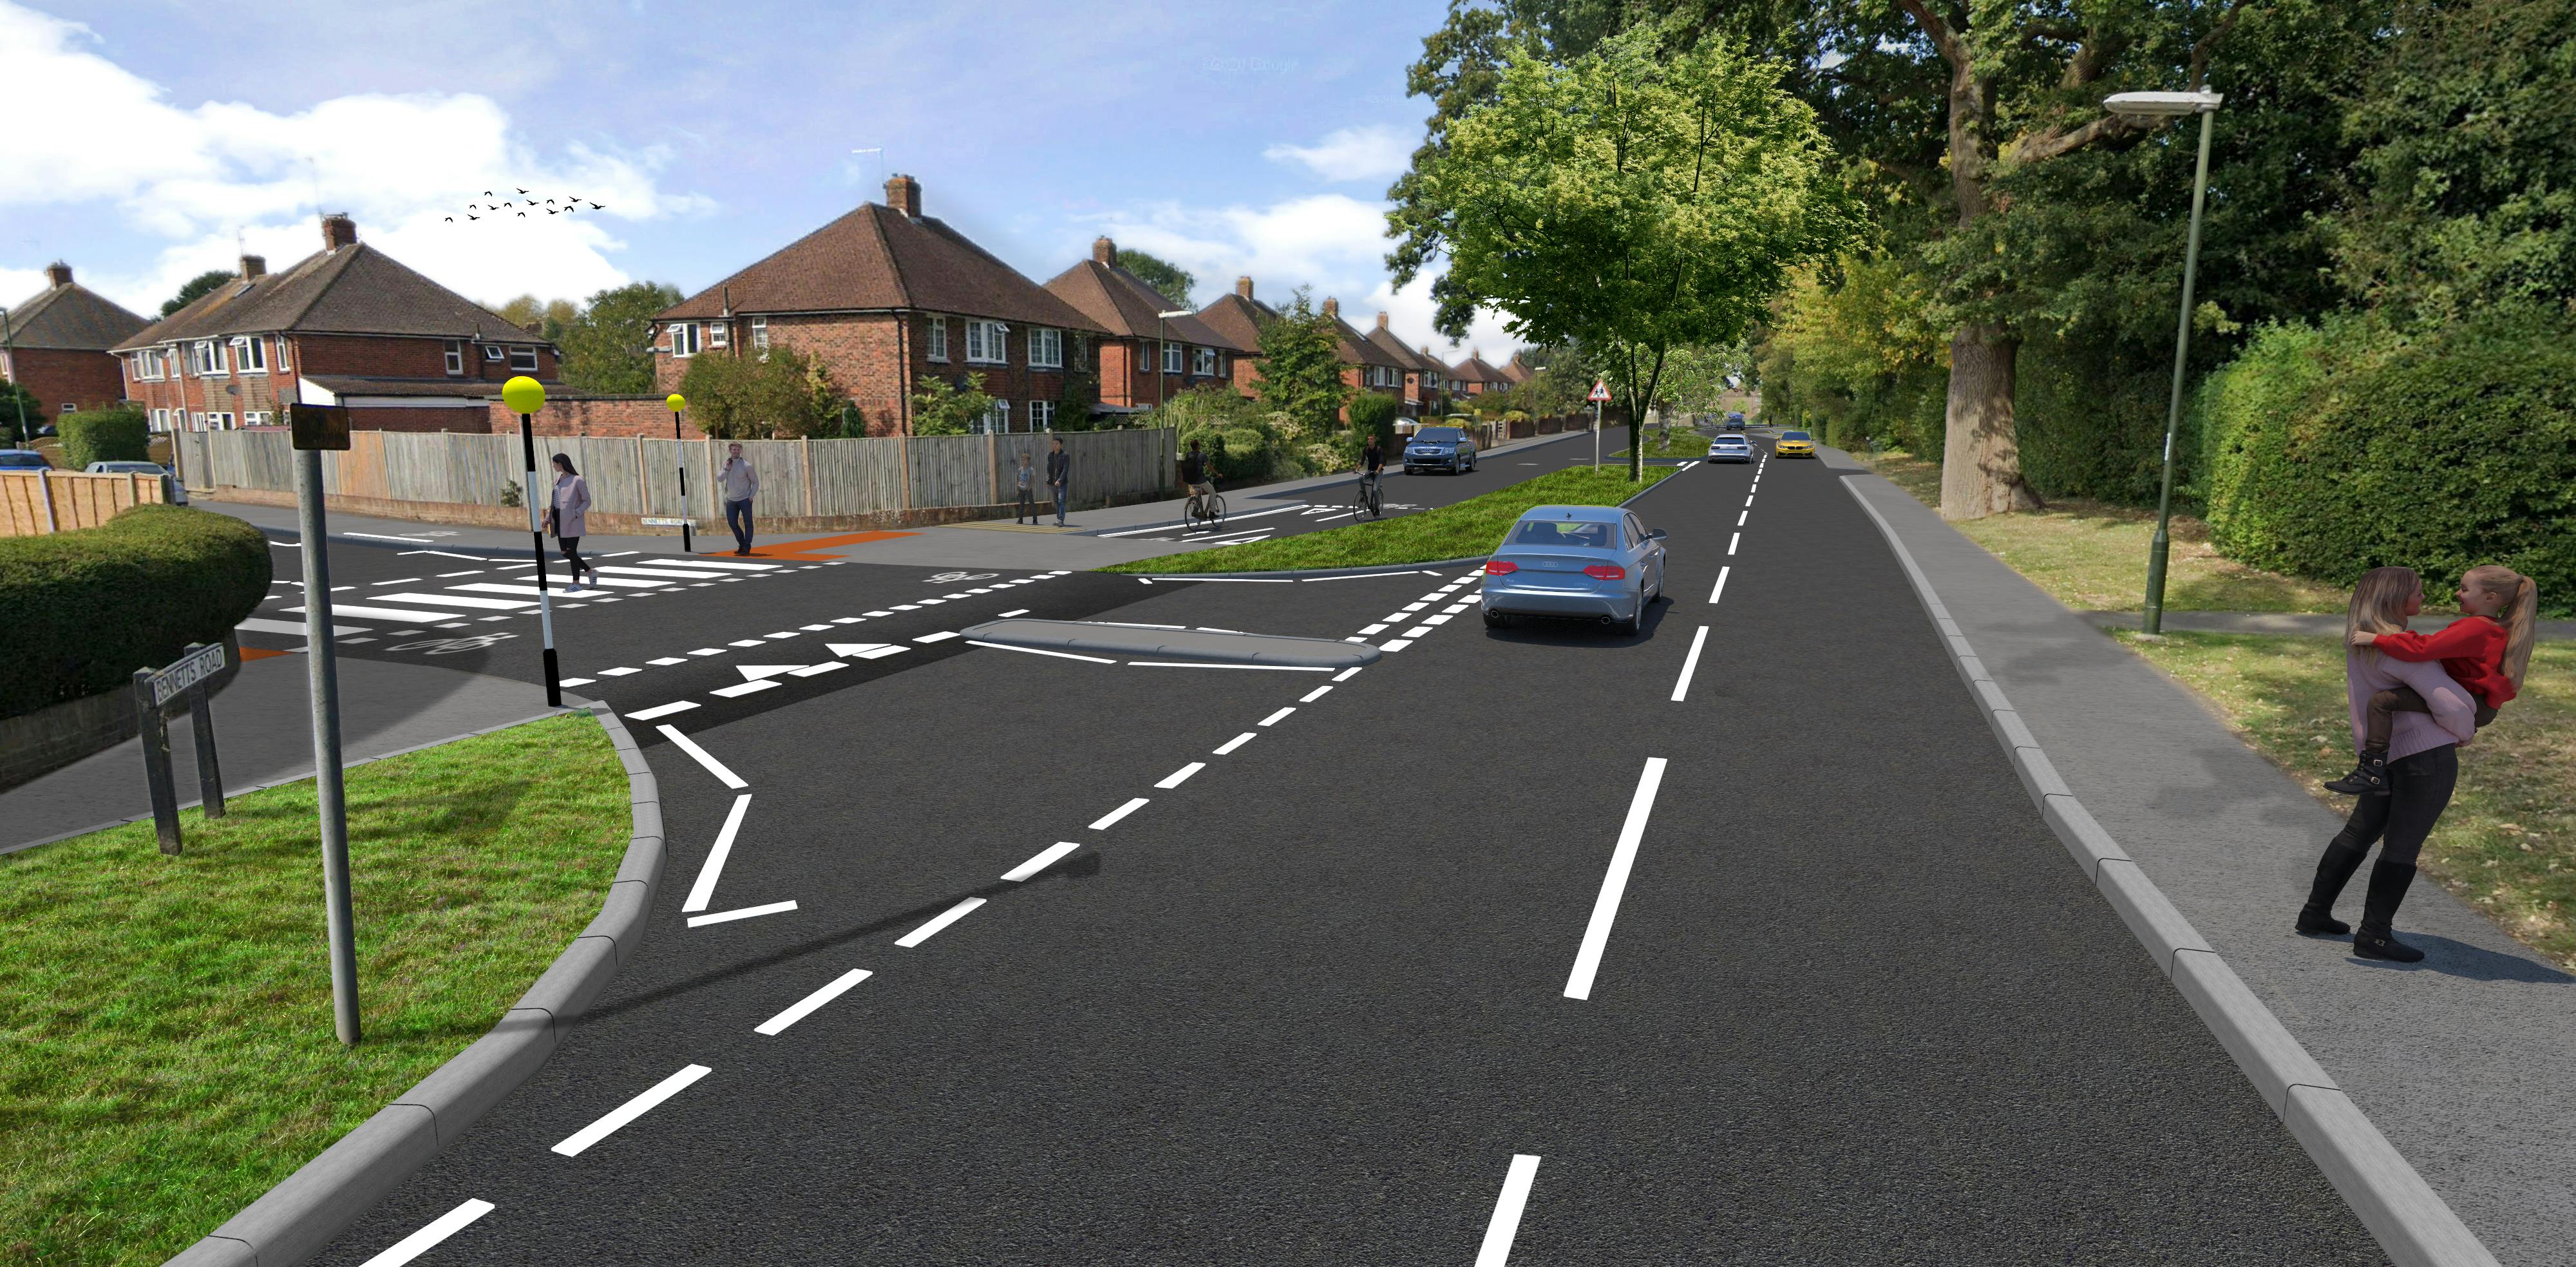 Visualisation of the proposed changes at the Comptons Lane/ Bennetts Road junction